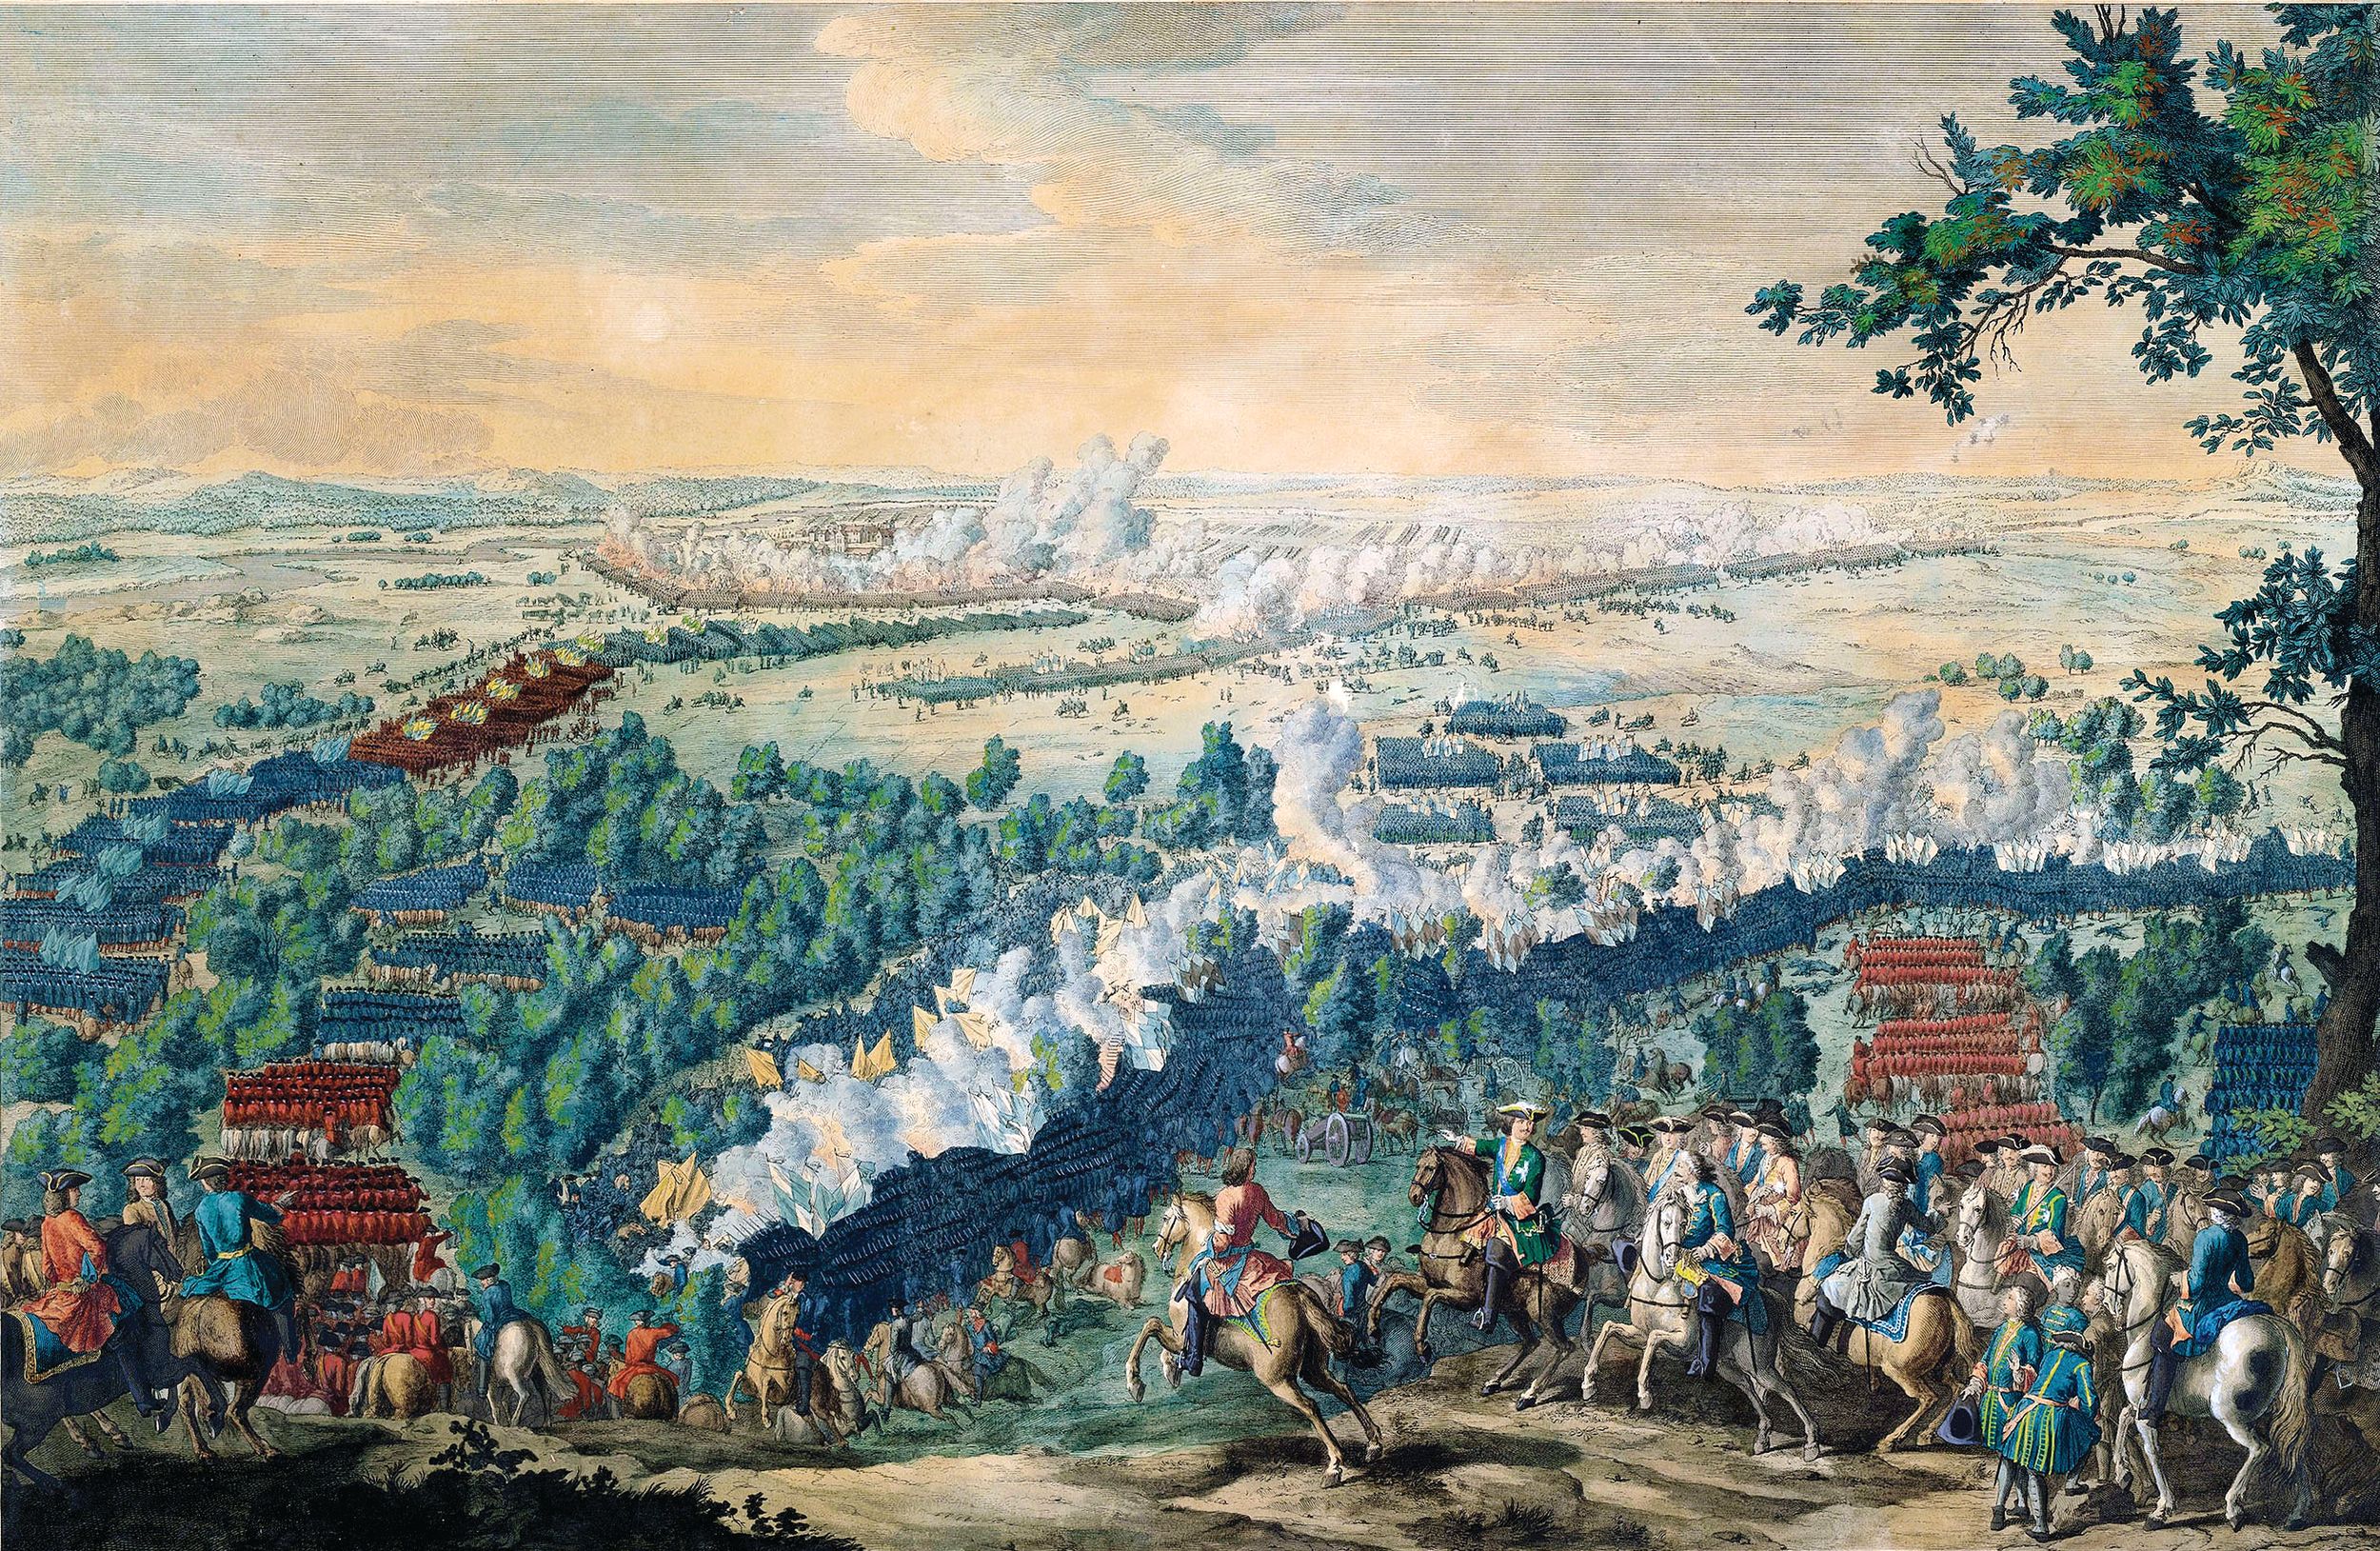 At the Battle of Lesnaya, Swedish General Lewenhaupt—mounted, in a red coat, pointing to the left of the scene with a baton—was outnumbered two to one, by the Army of Peter I.  After some eight hours, Lewenhaupt had lost half his men and retreated under cover of darkness, abandoning the supply wagons meant for Charles XII.